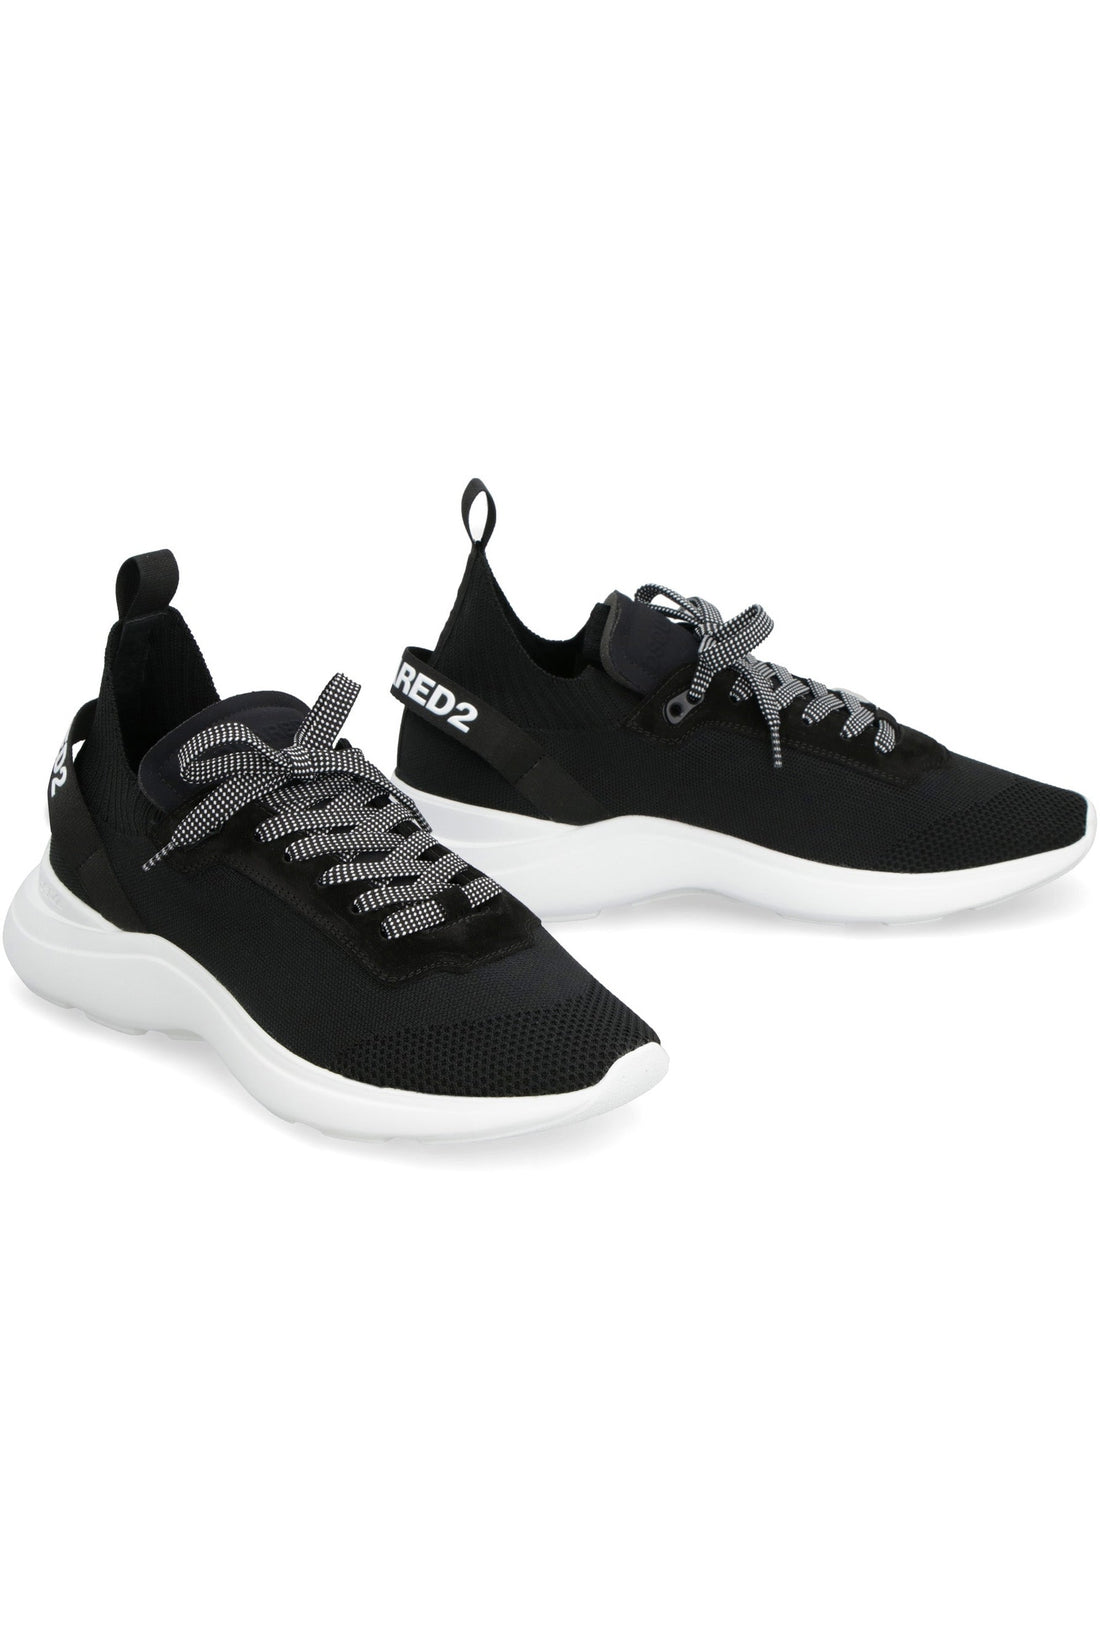 Dsquared2-OUTLET-SALE-Fly running sneakers-ARCHIVIST